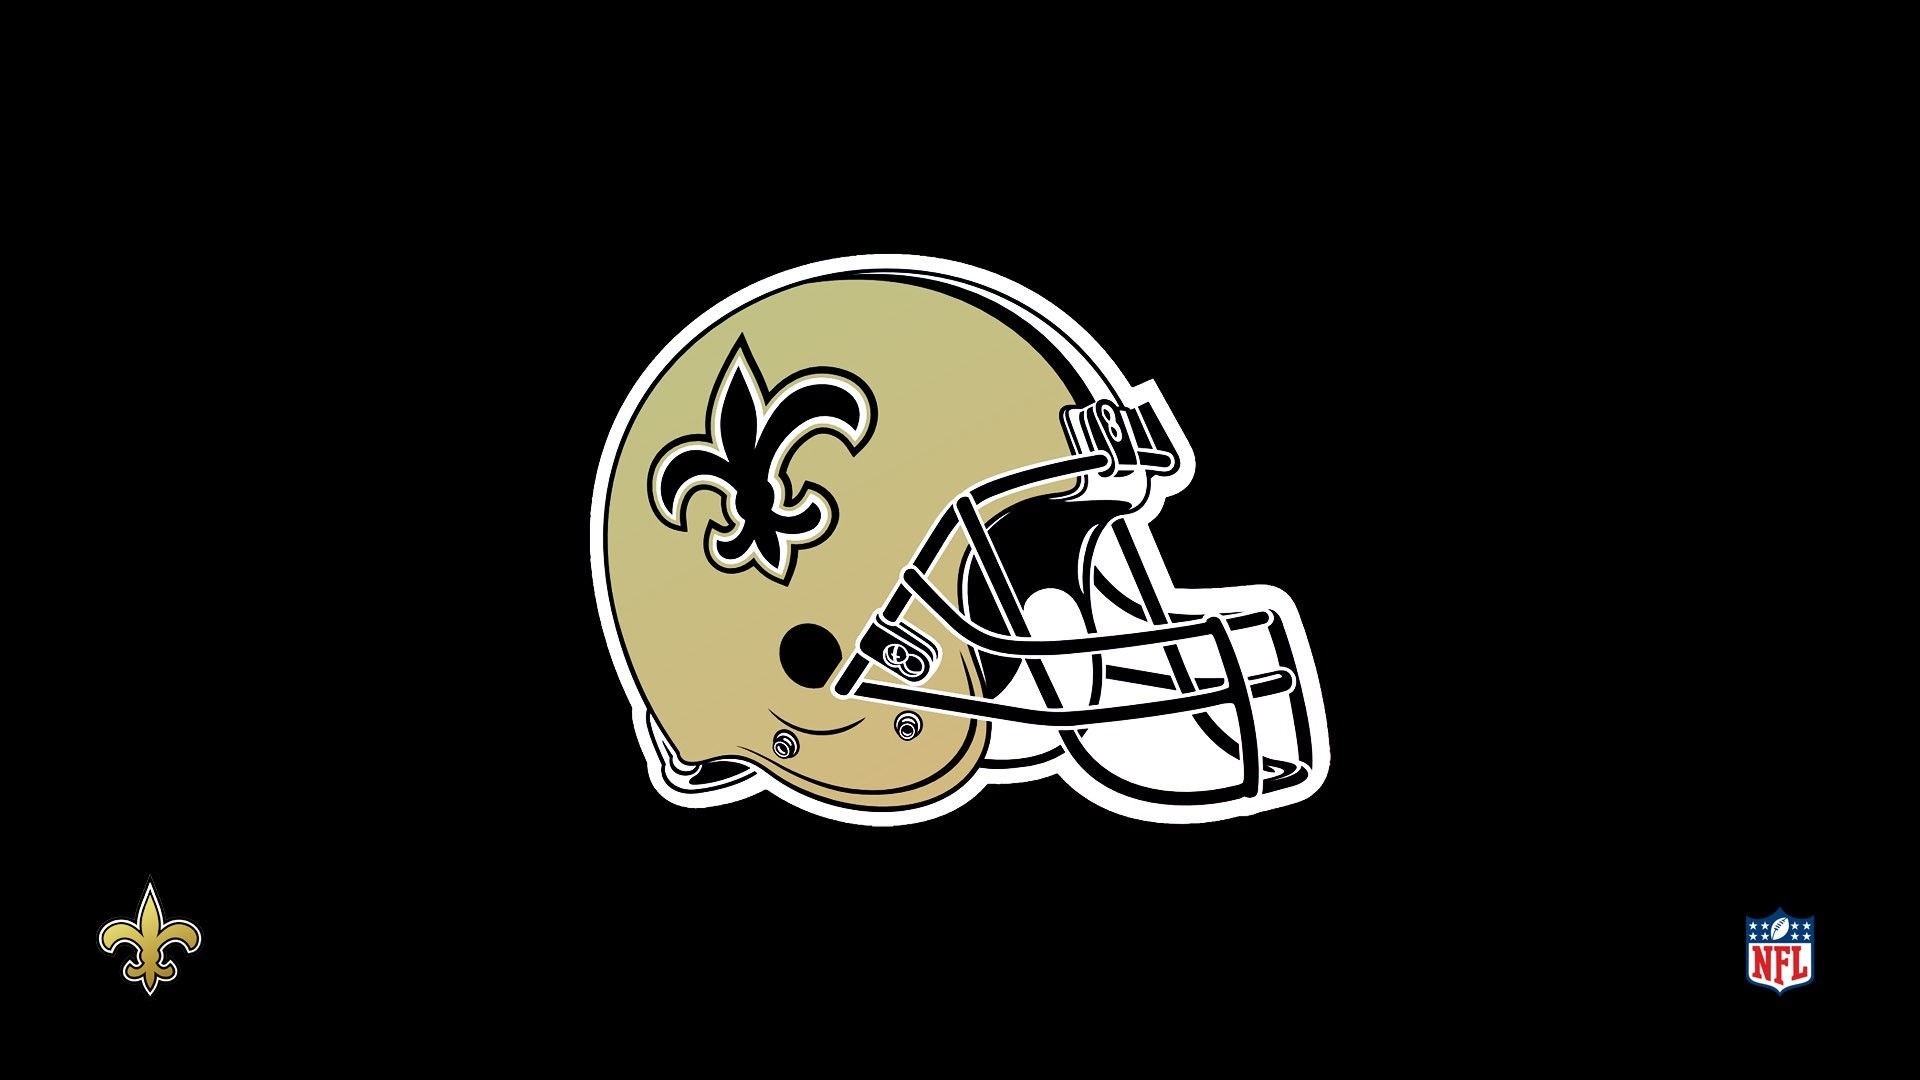 HD Desktop Wallpaper New Orleans Saints with resolution 1920x1080 pixel. You can make this wallpaper for your Mac or Windows Desktop Background, iPhone, Android or Tablet and another Smartphone device